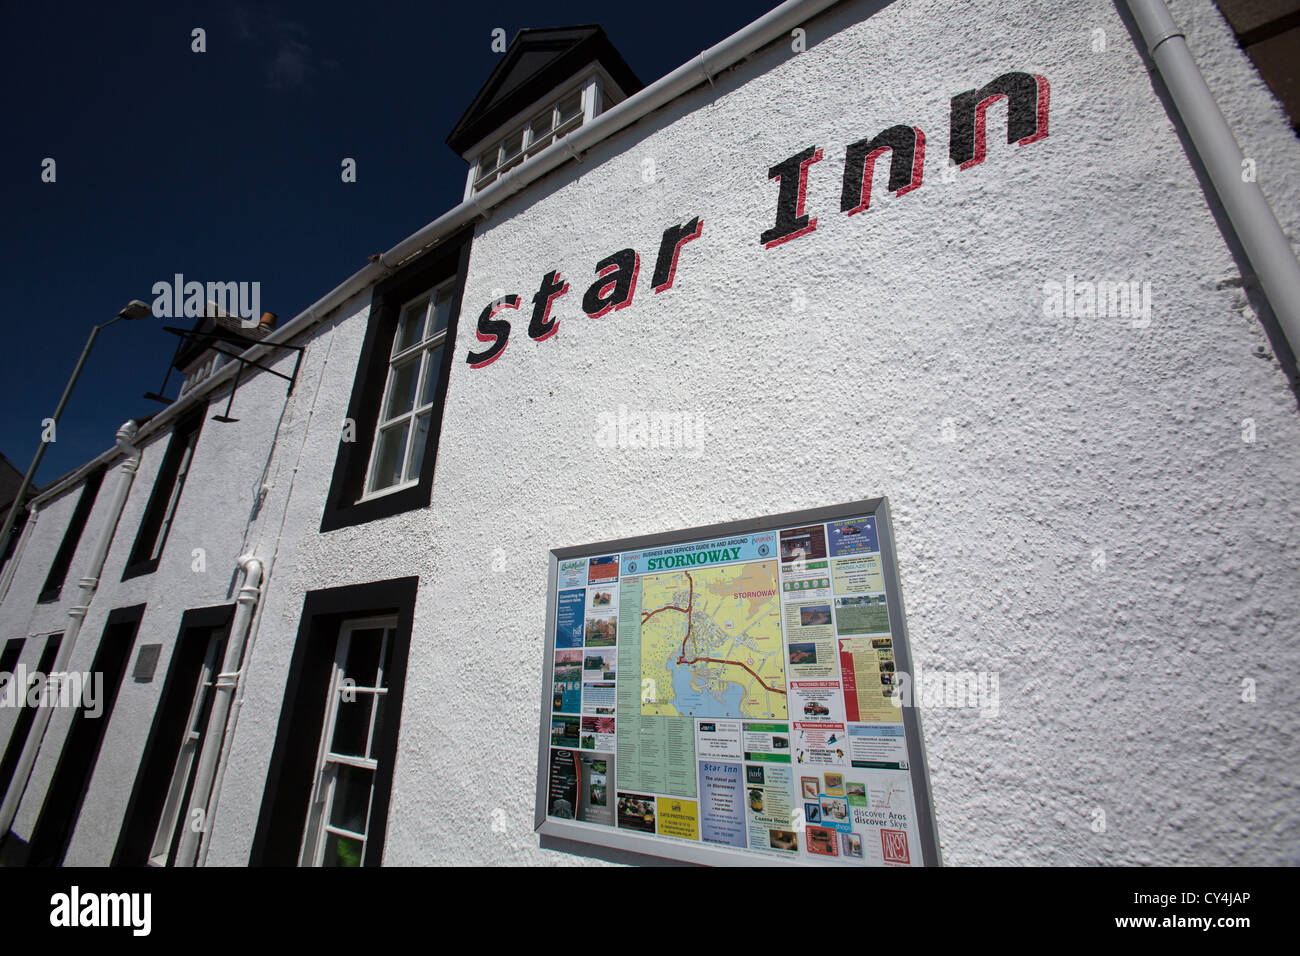 Town of Stornoway, Lewis. The early 19th century Starr Inn public house and hotel at South Beach. Stock Photo